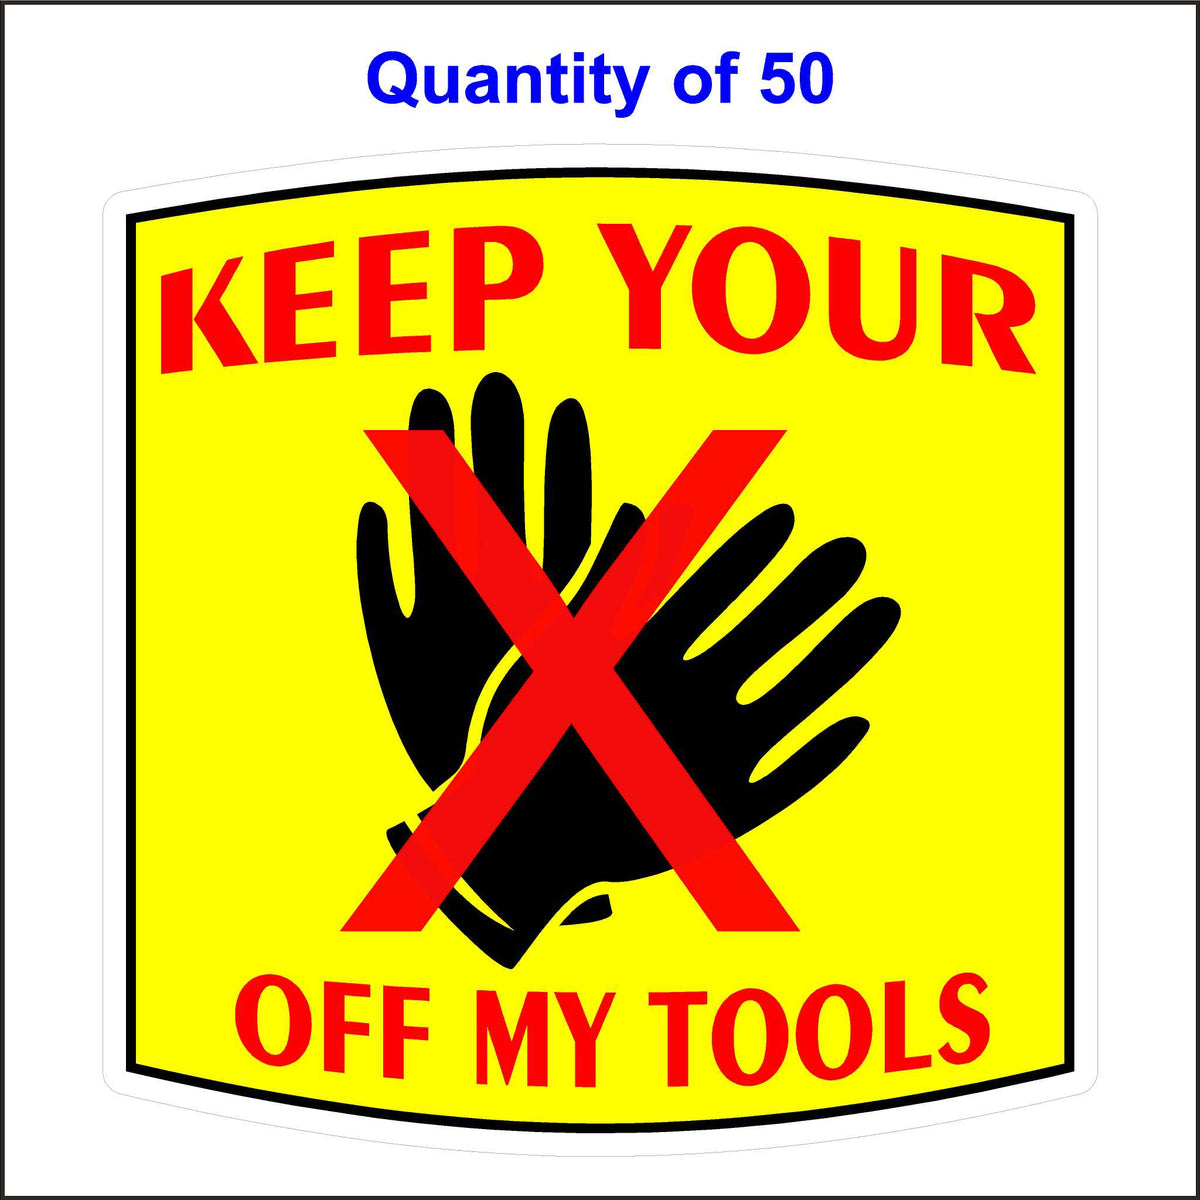 Keep Your Hands off My Tools Sticker. Yellow Background, Black Hands and Red Lettering. 50 Quantity.